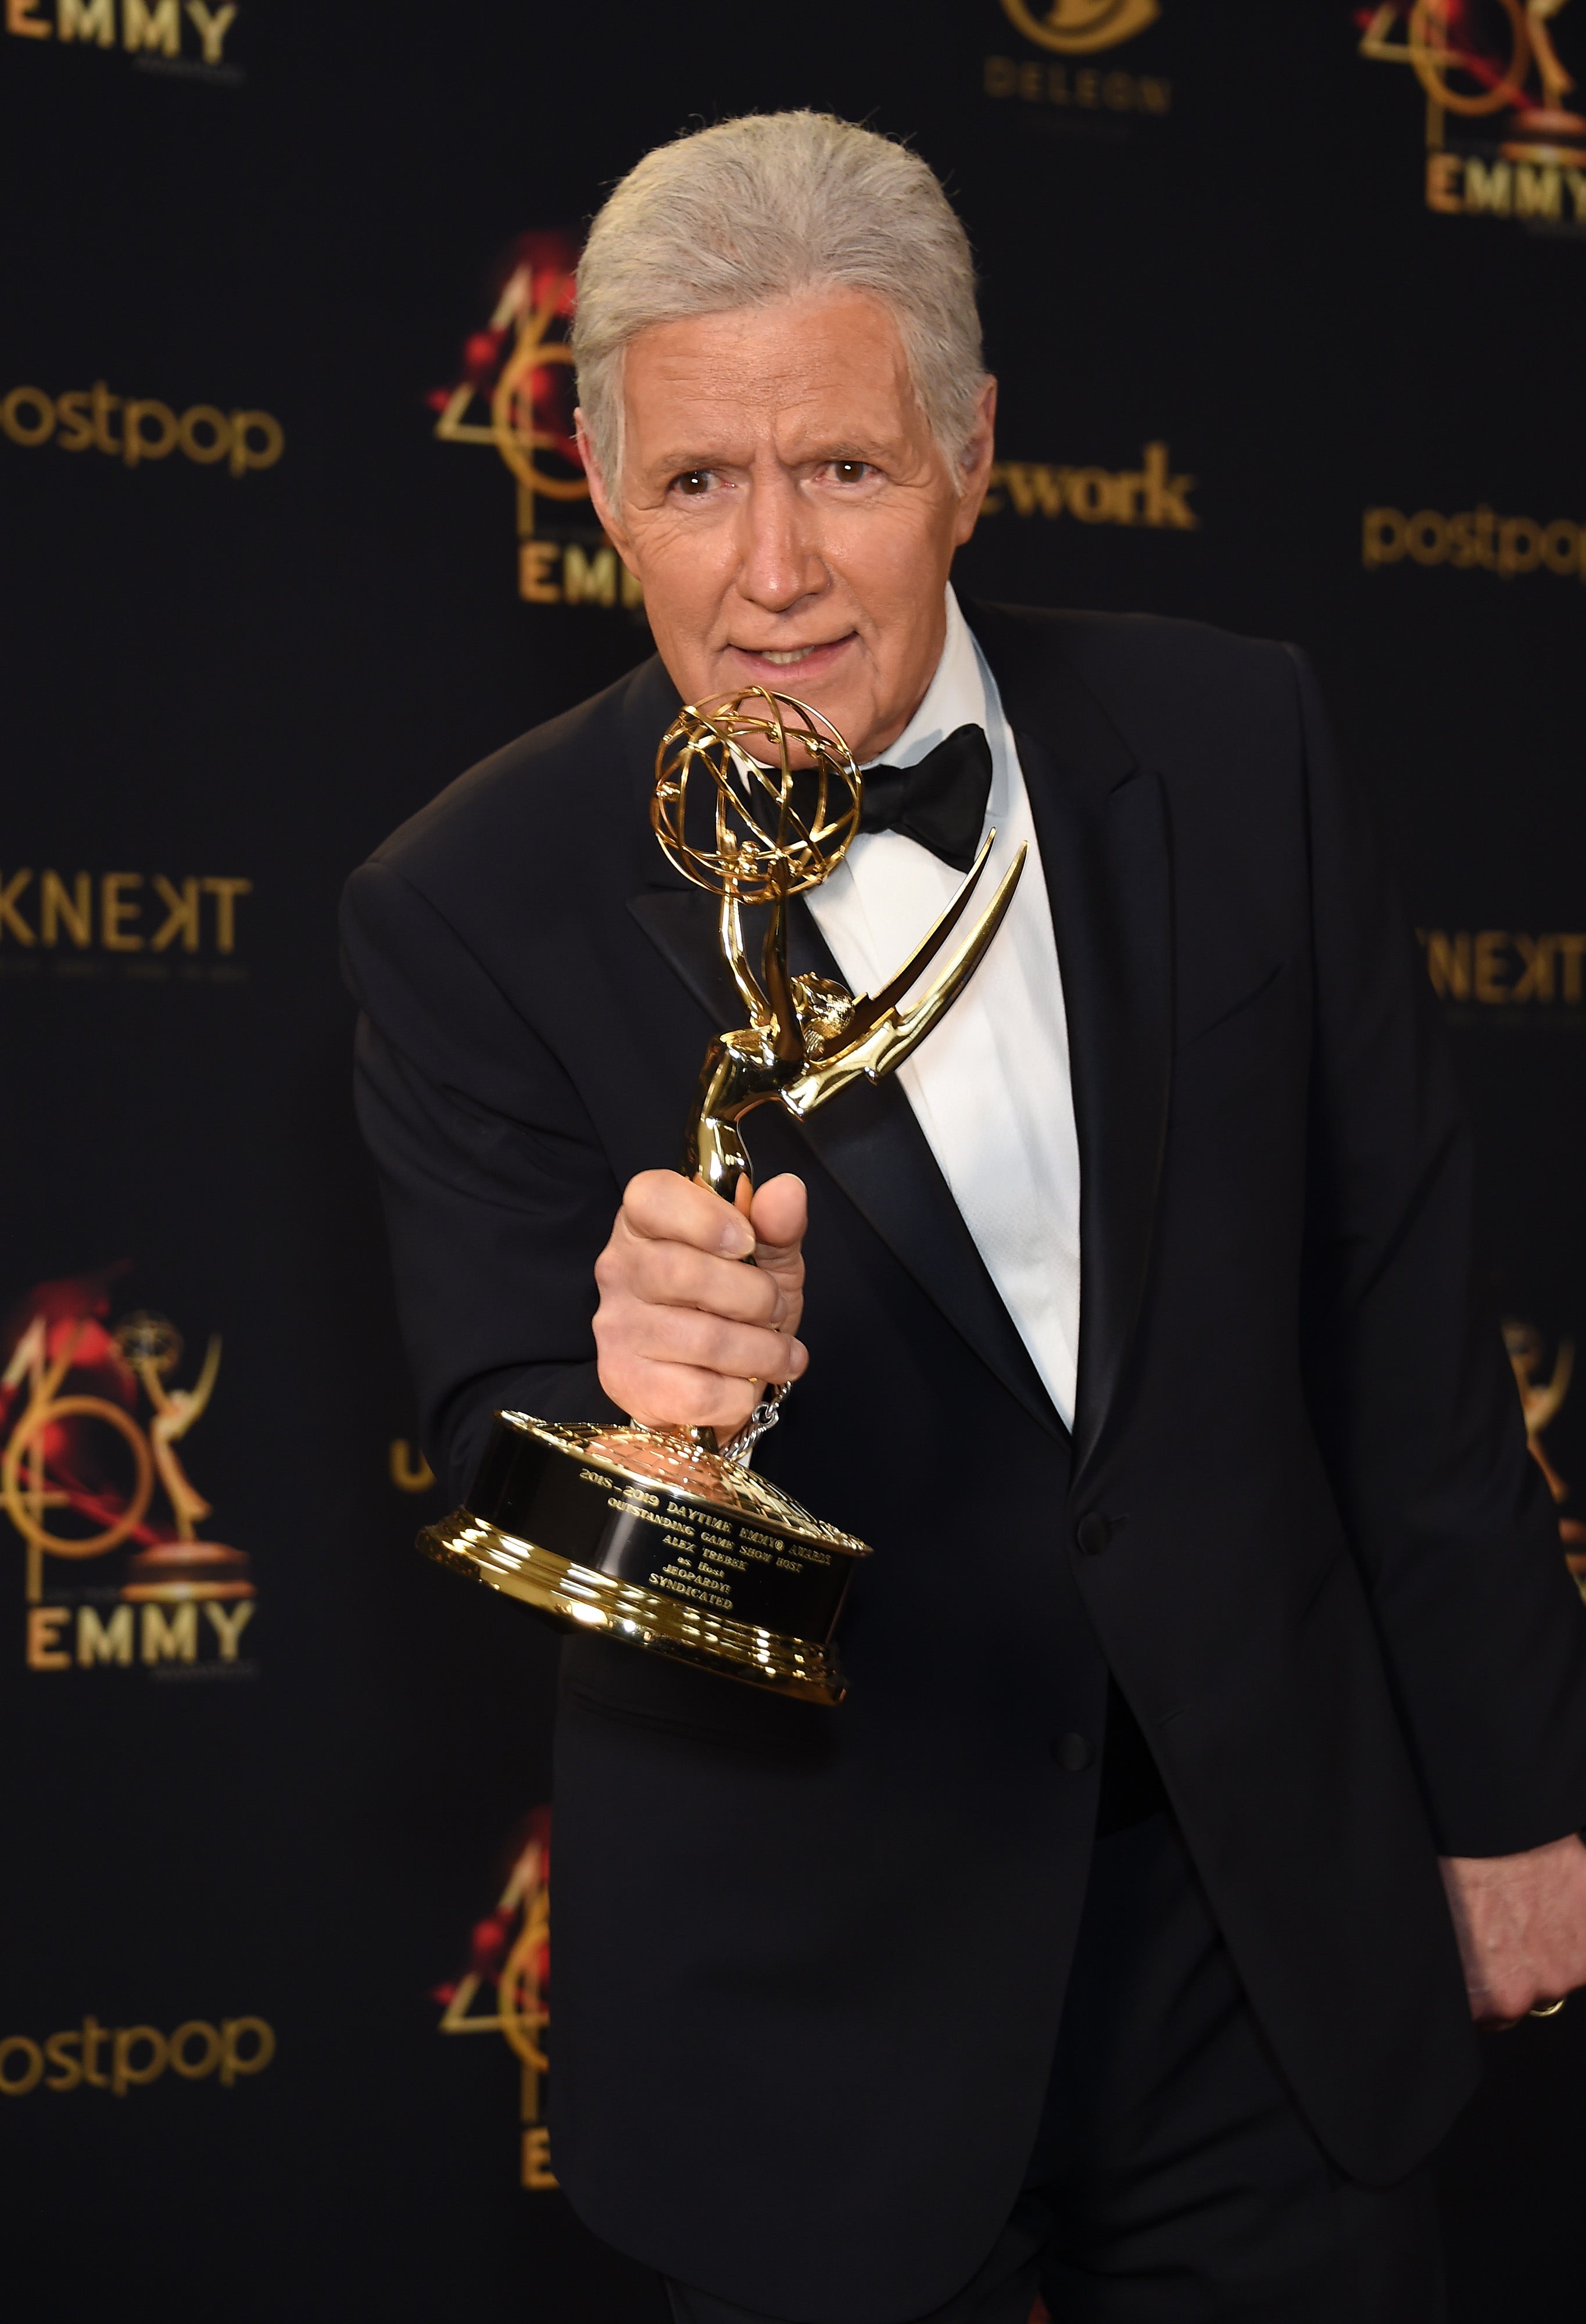 Alex Trebek poses with the Daytime Emmy Award for Outstanding Game Show Host for his work on ‘Jeopardy!’ on 5 May 2019 in Pasadena, California